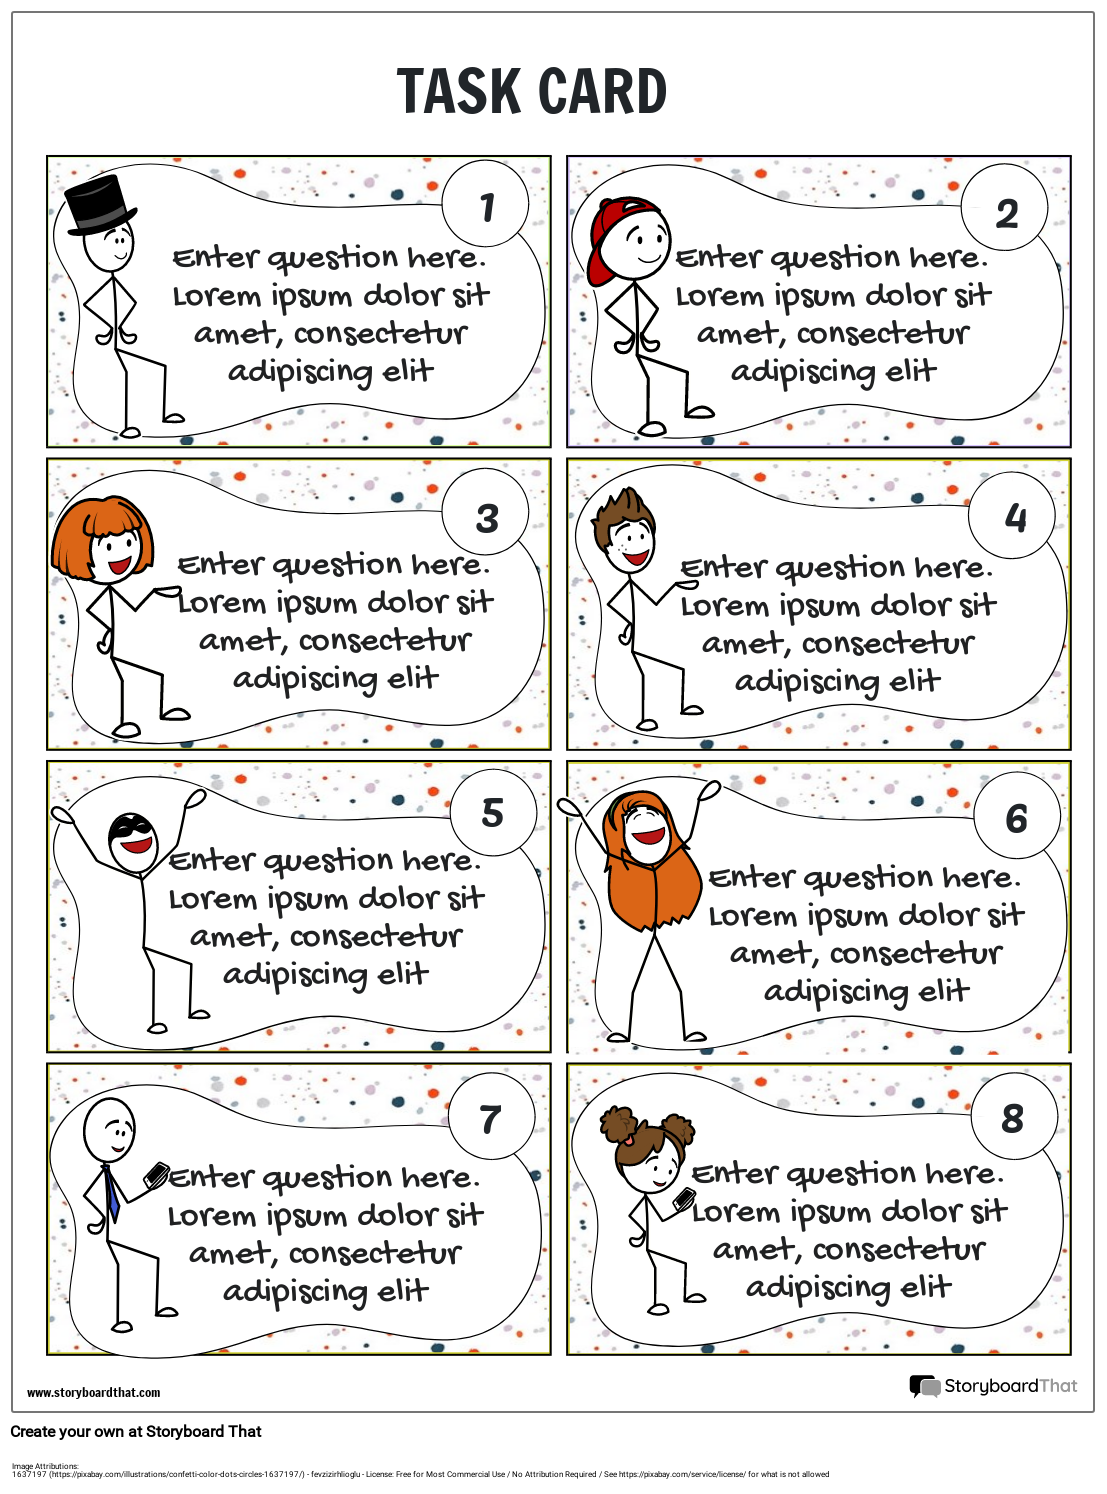 Task card for word problems